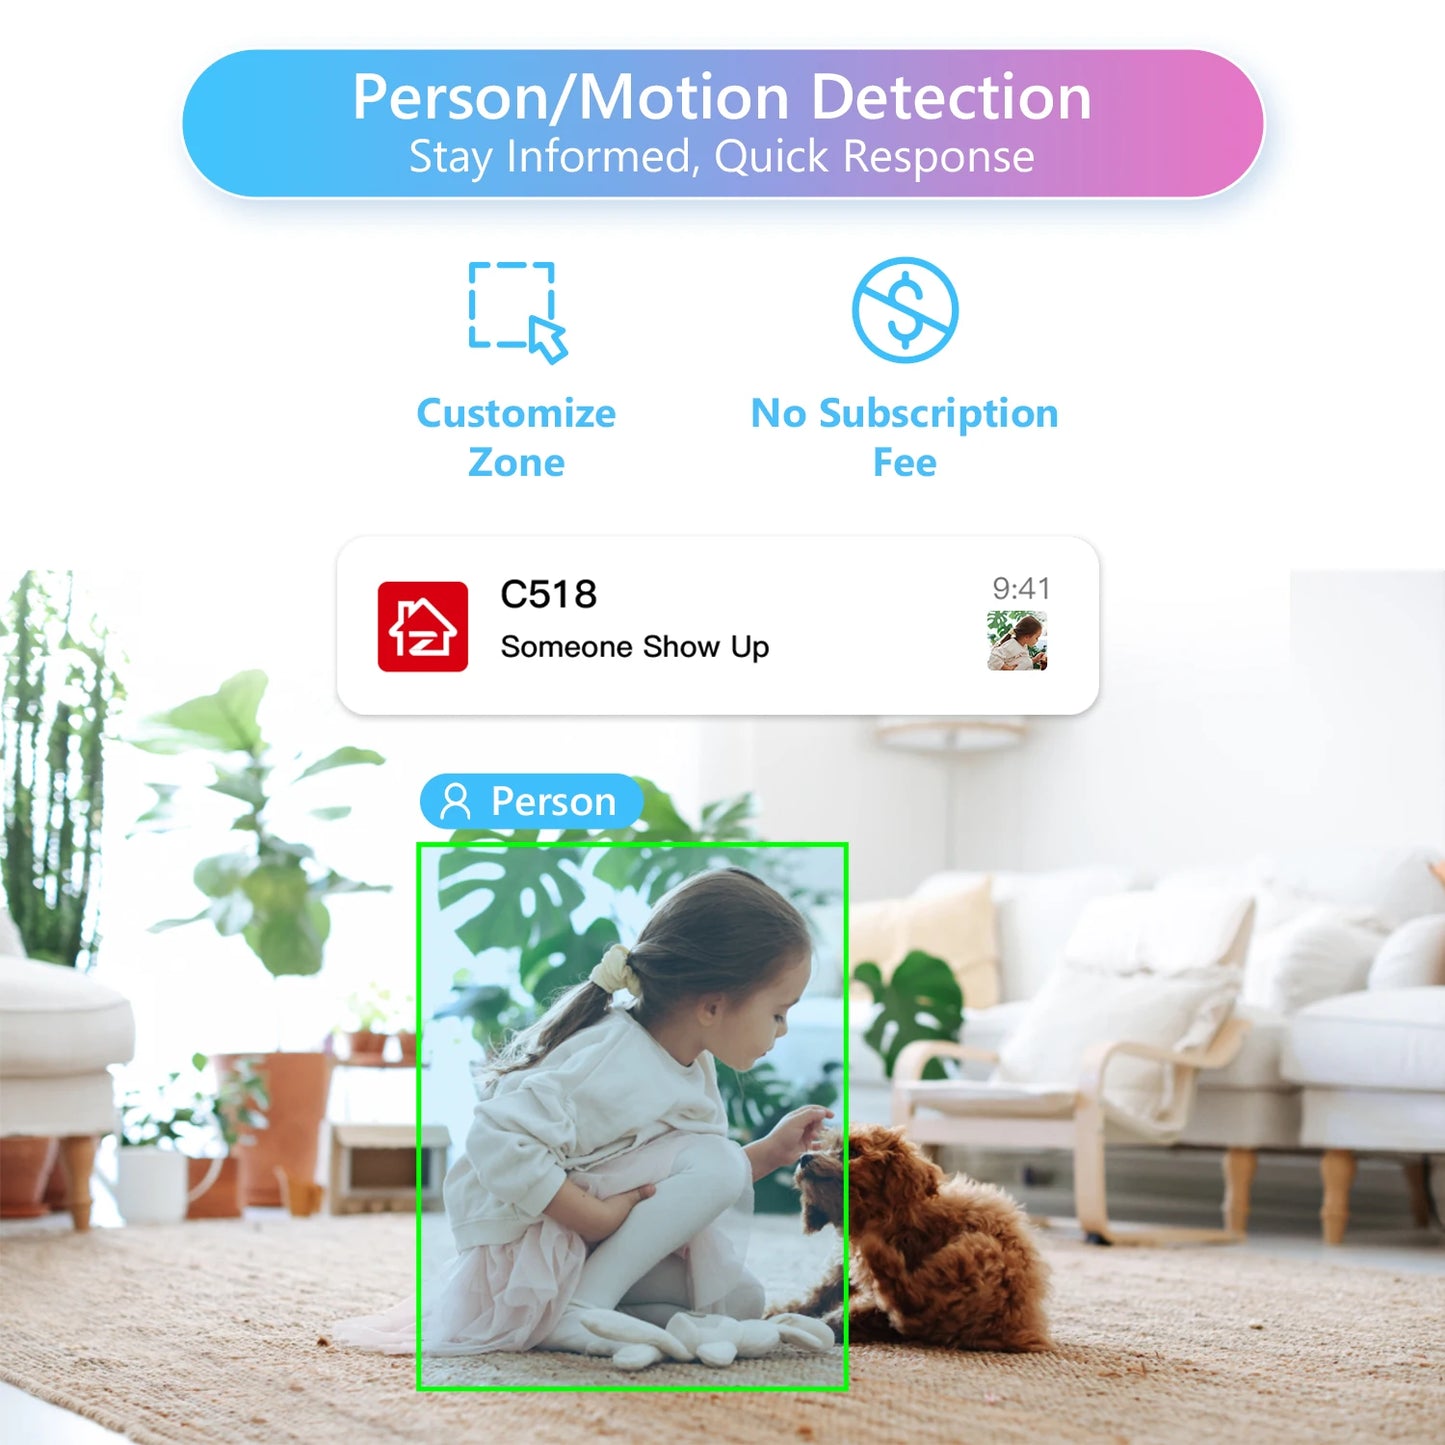 ZOSI Indoor Pan/Tilt Smart Security Camera C518 2K 360 Degree Baby Pet Monitor 2.4G/5G Dual-Band WiFi Home Cam with Phone APP